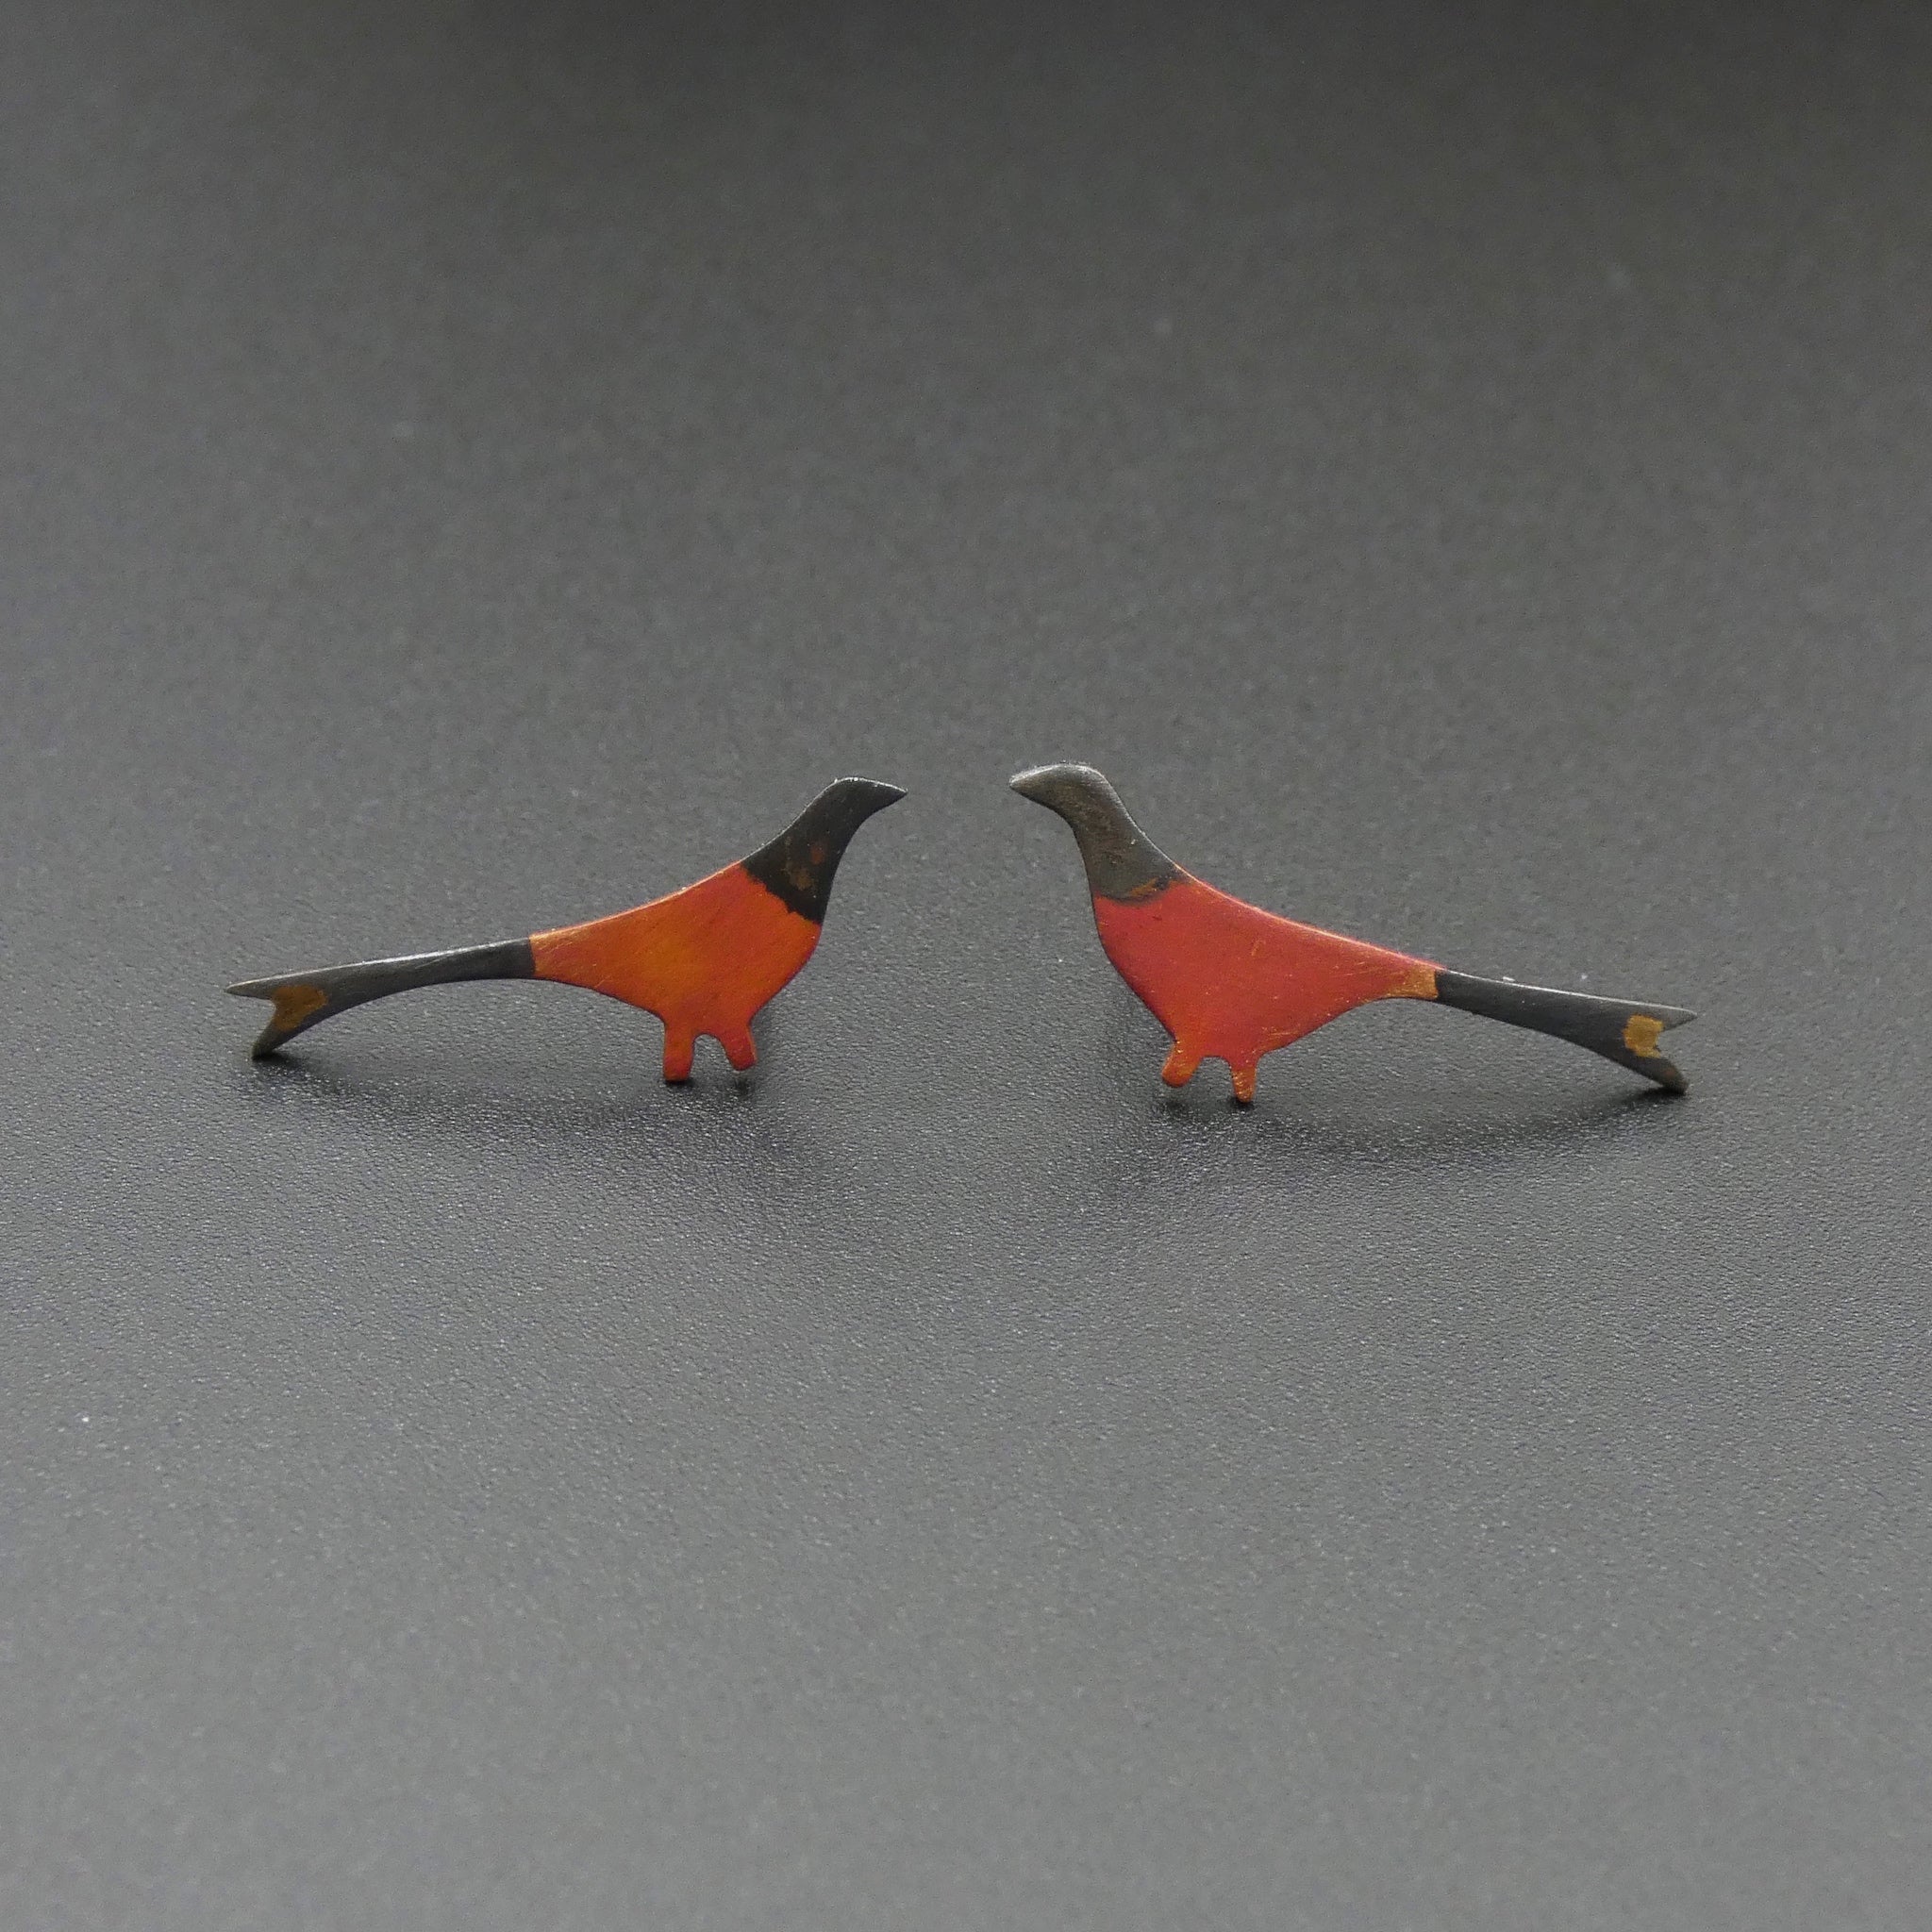 Copper Pheasant Stud Earrings by Jeweller Becky Crow